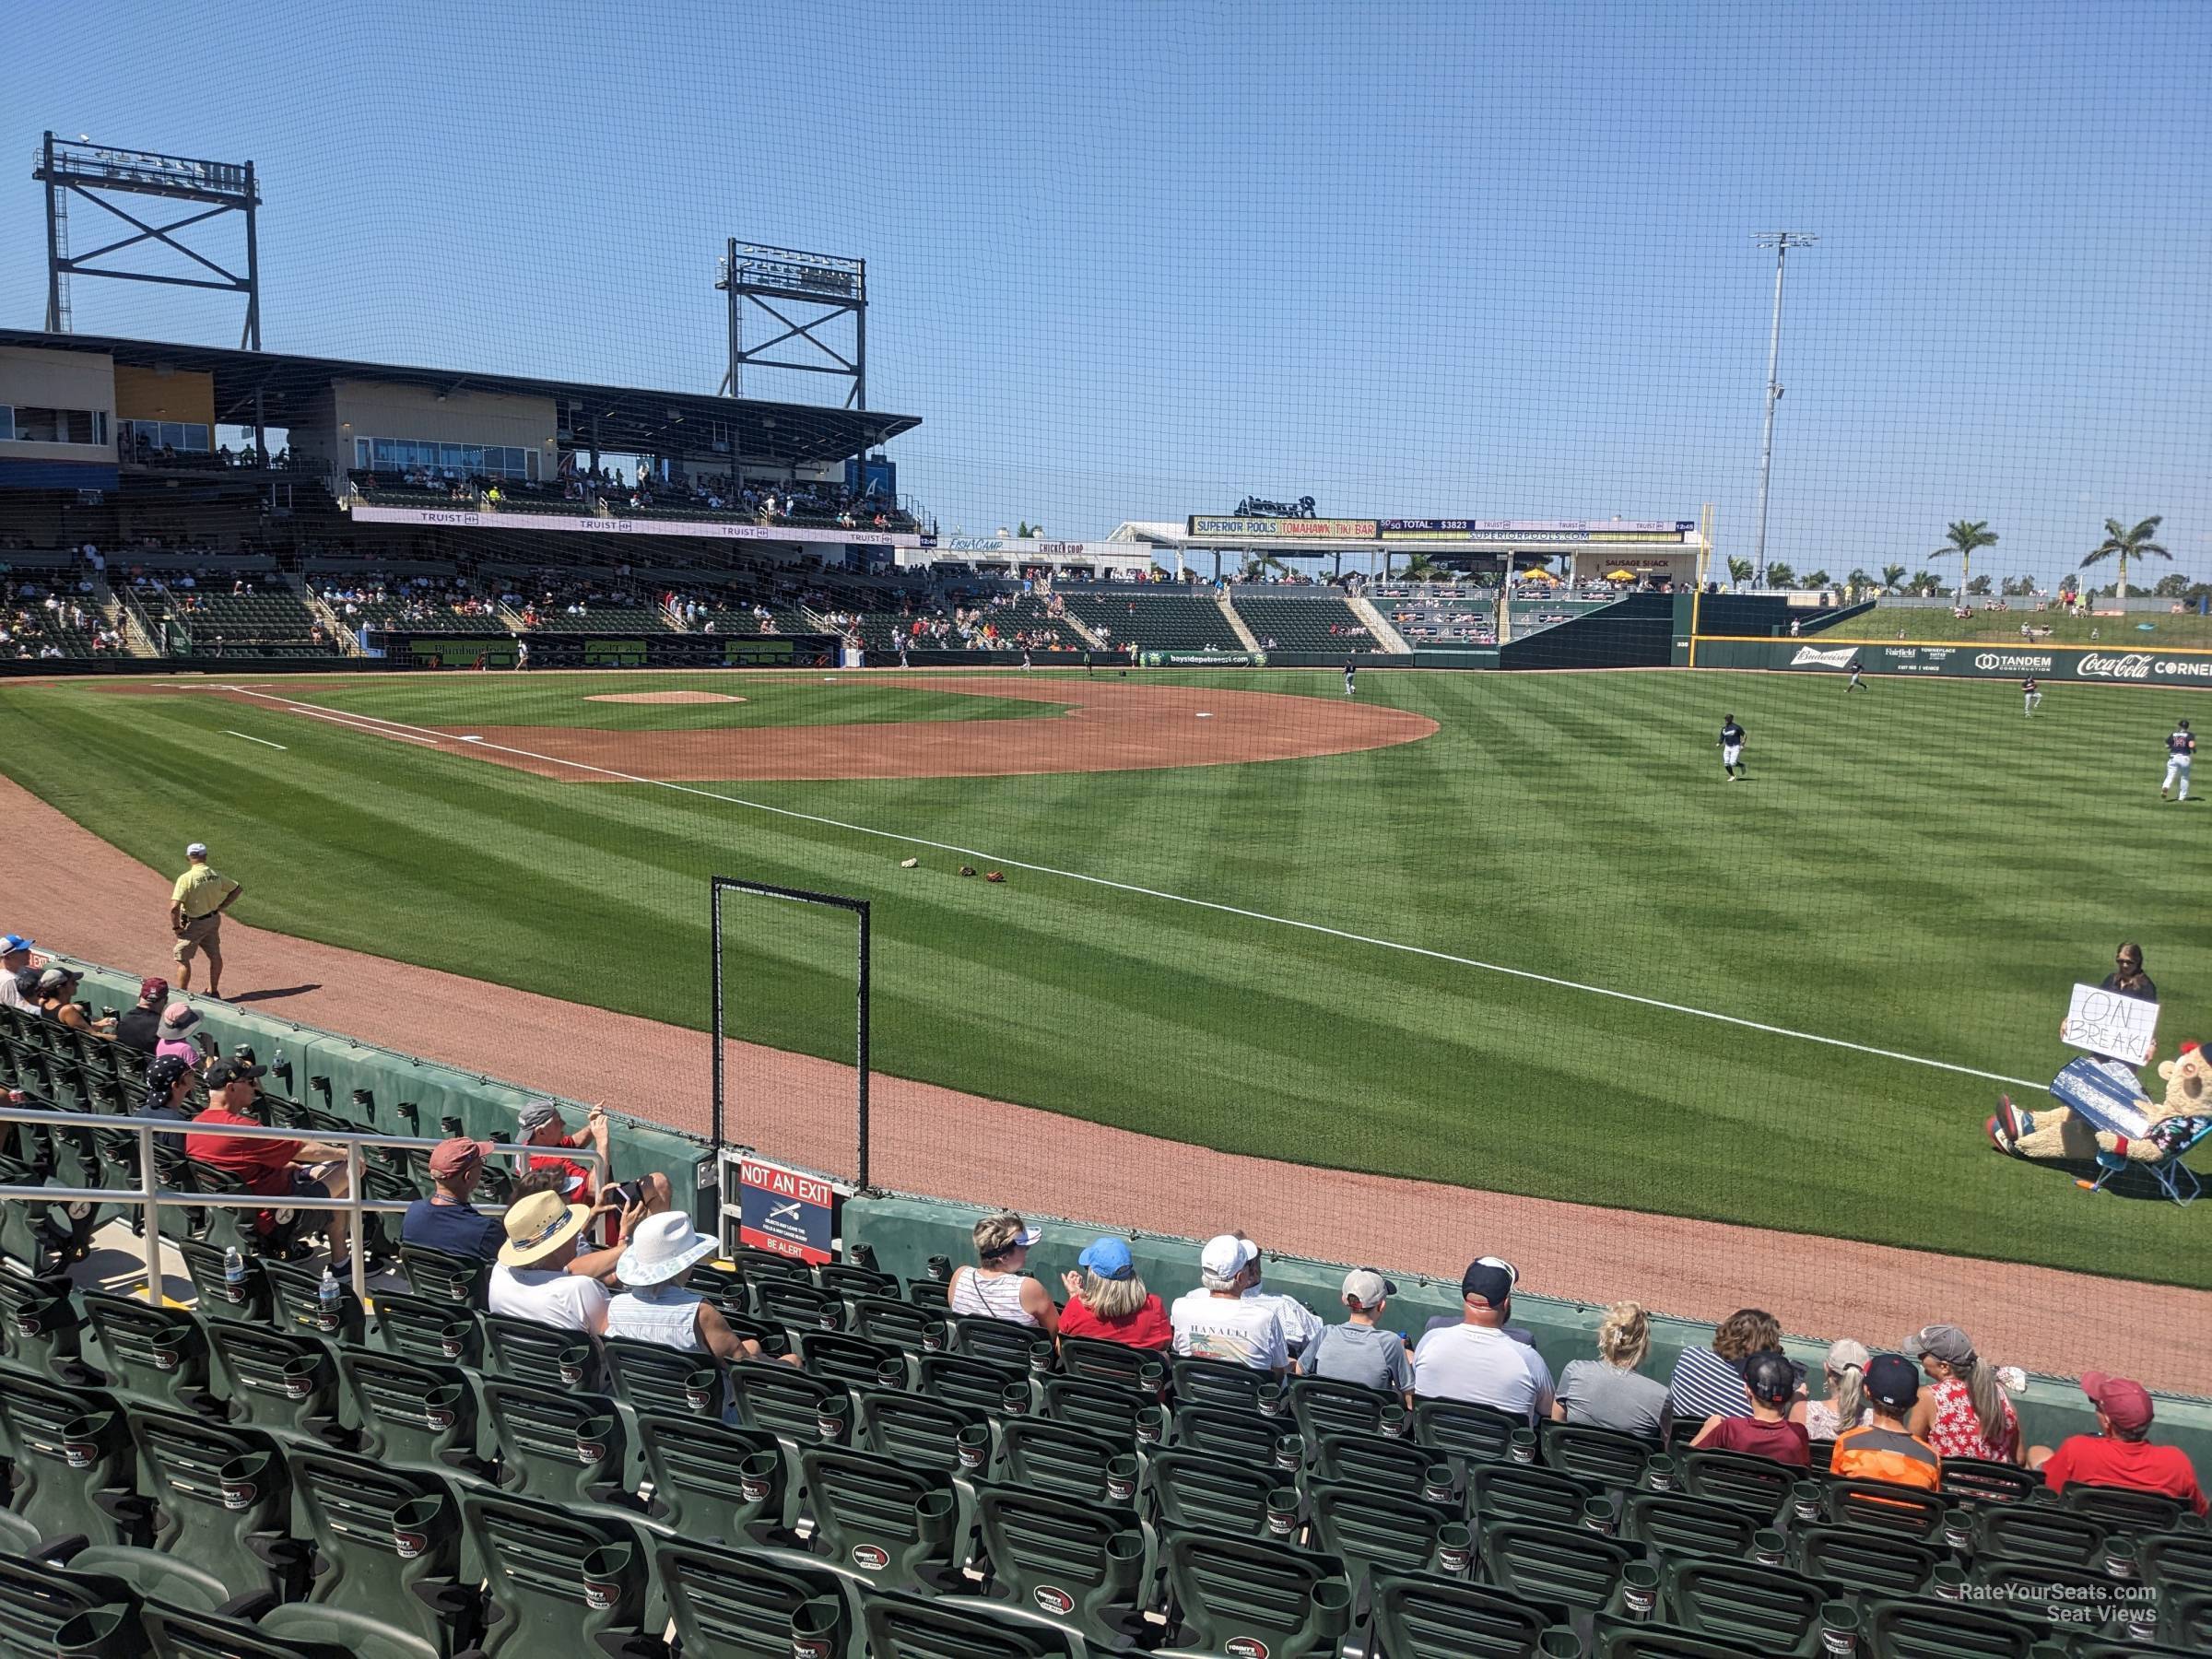 section 103, row 11 seat view  - cooltoday park